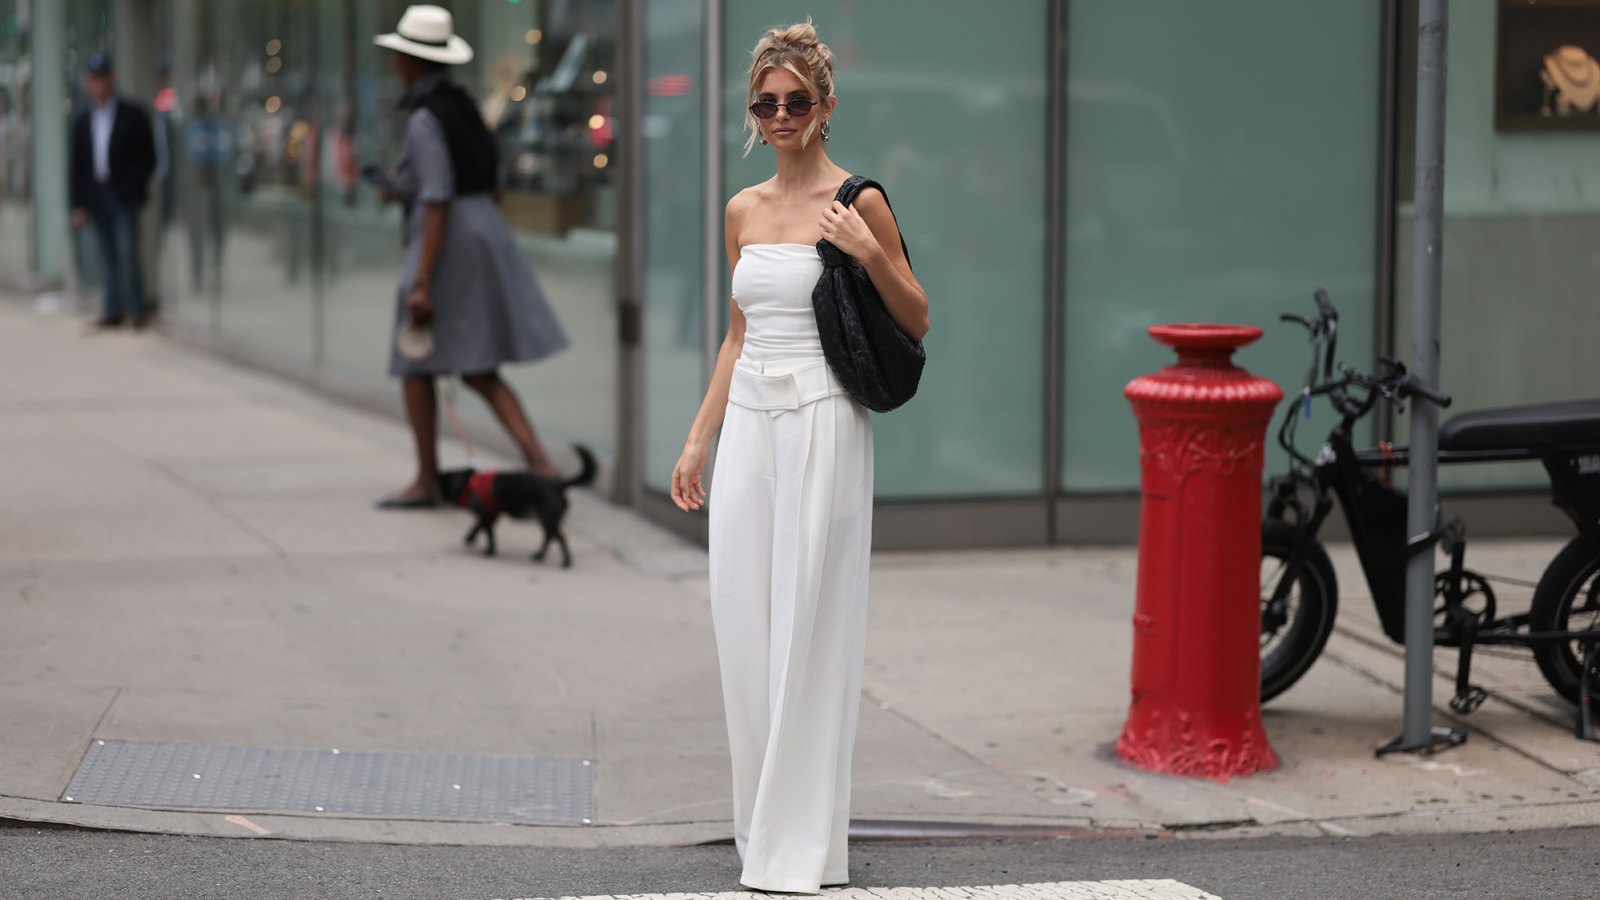 20 Casually Elegant Fashion Finds That Belong on Your IG Feed